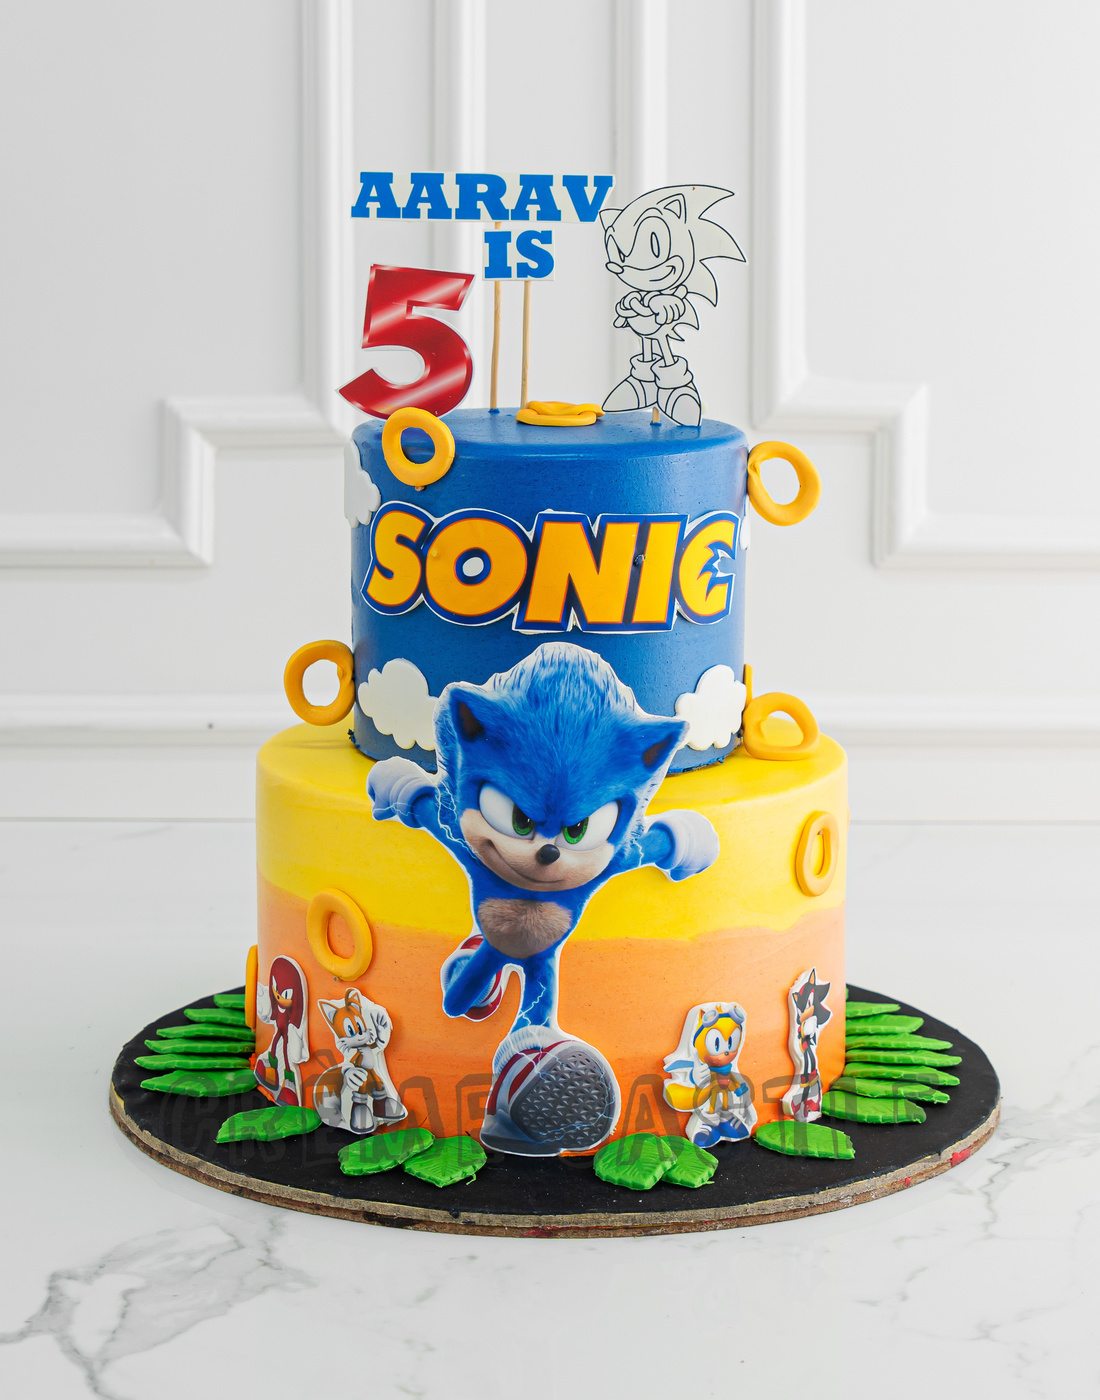 Sonic the hedgehog - Decorated Cake by Konstantina - K & - CakesDecor